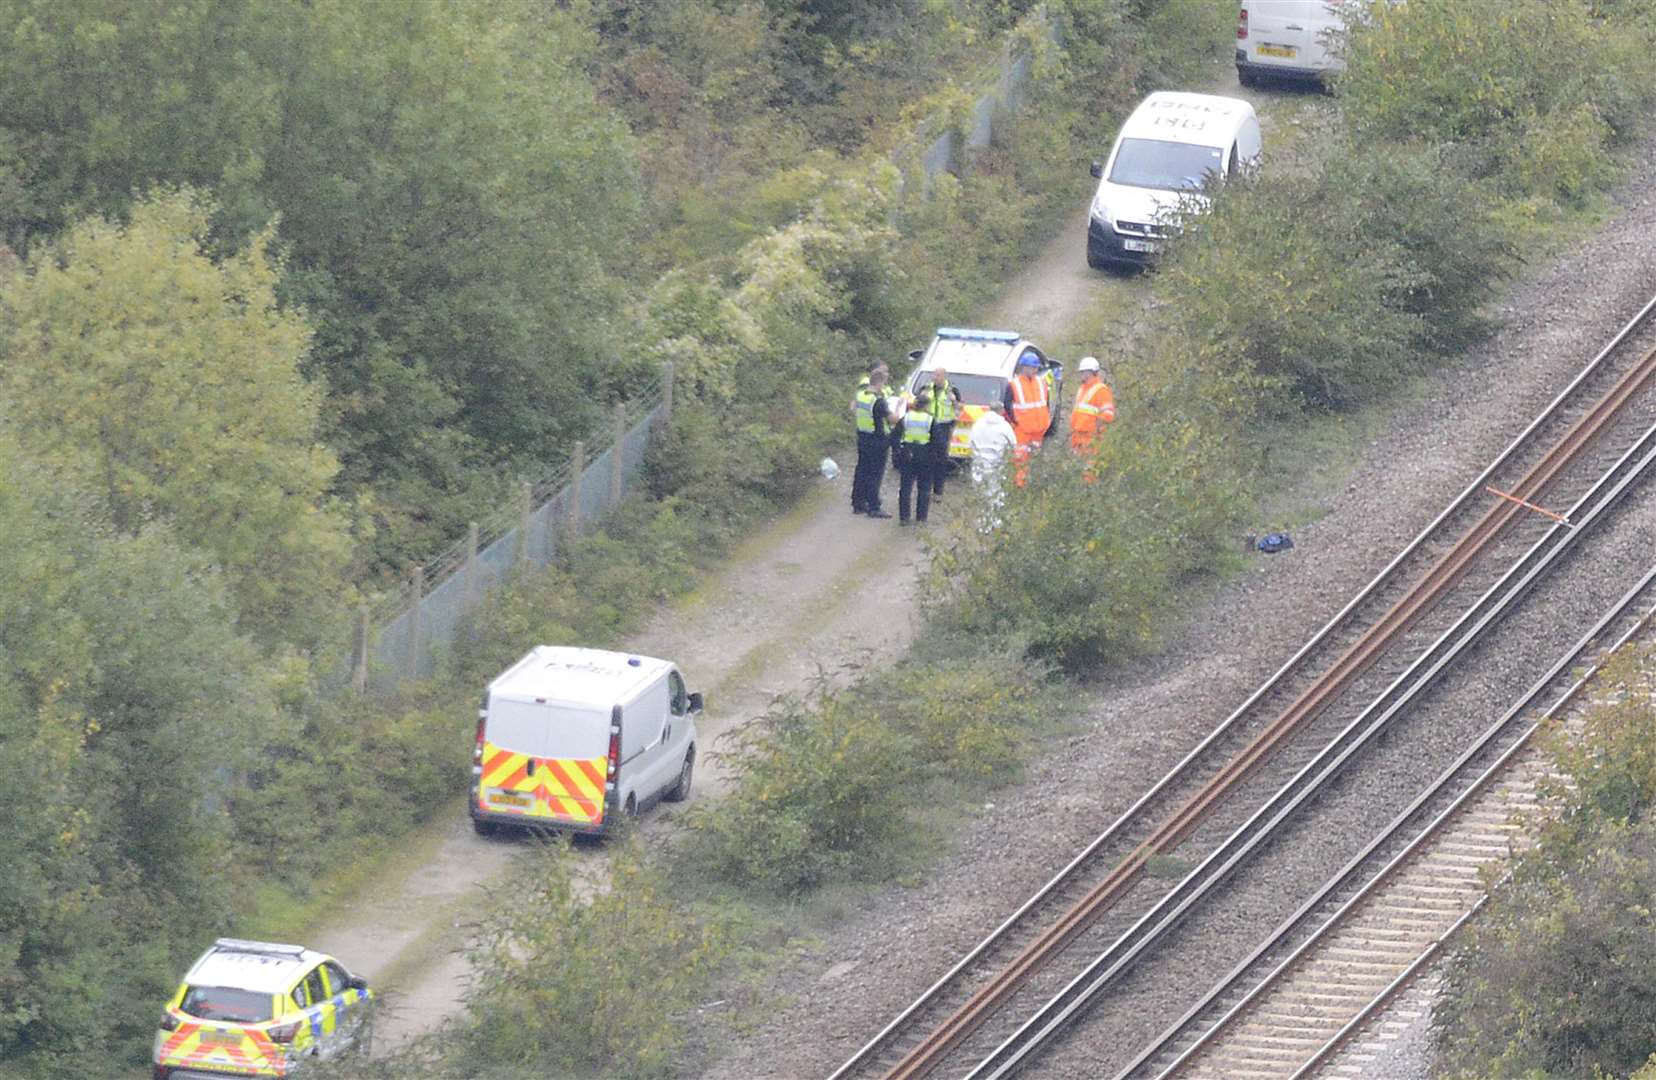 Police and rail officials at the scene. Pictures: Paul Amos